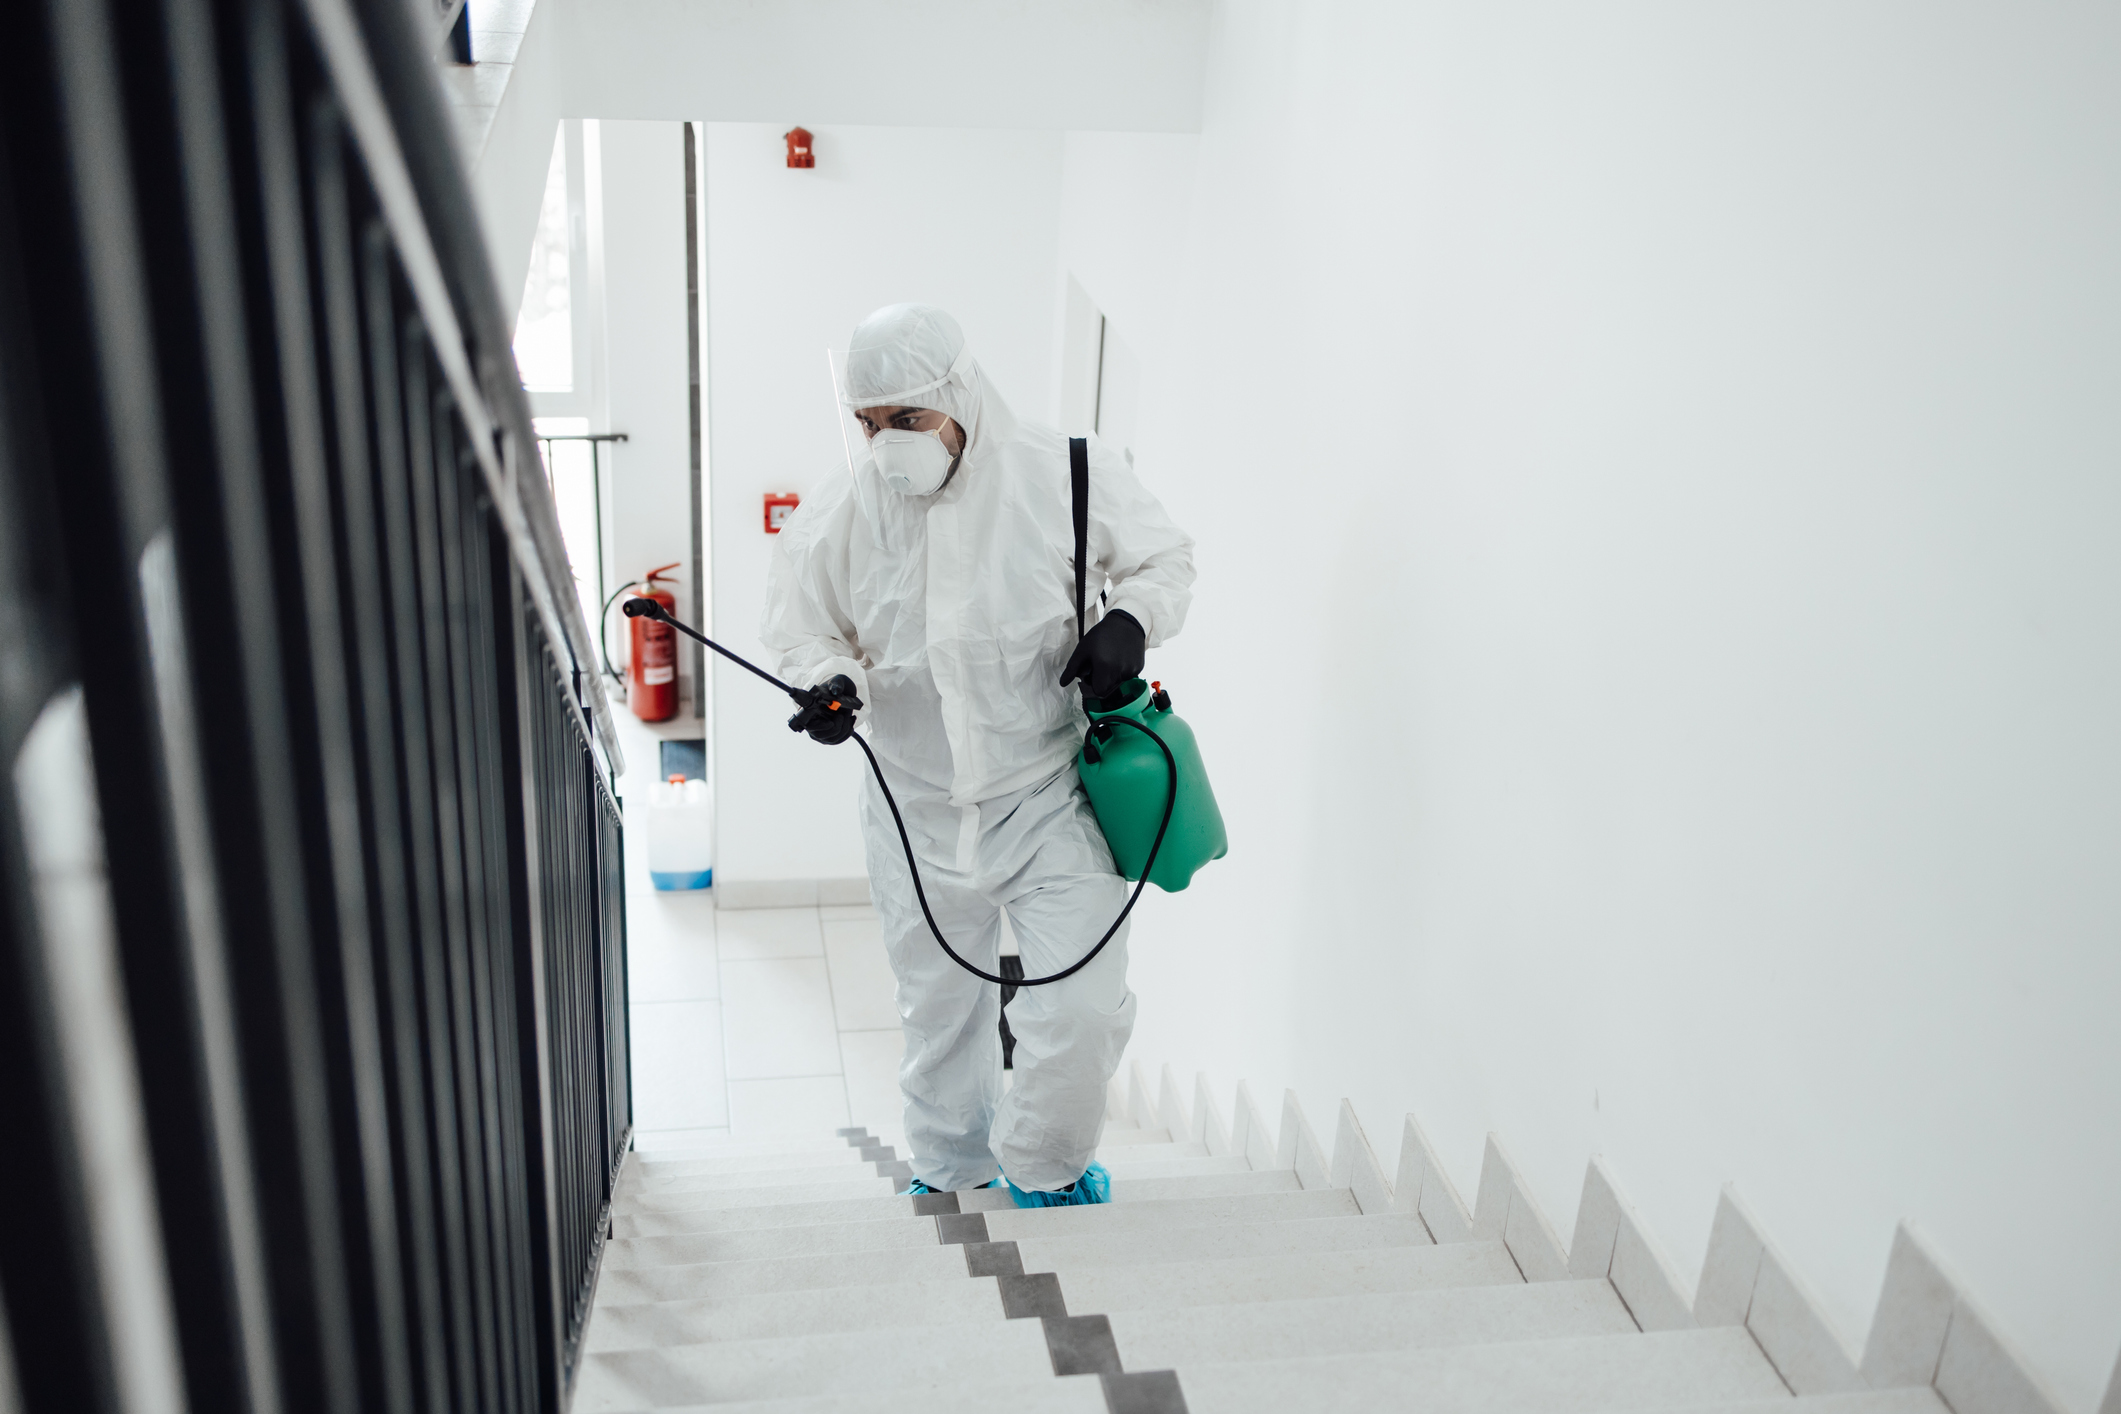 Spraying, disinfection and decontamination